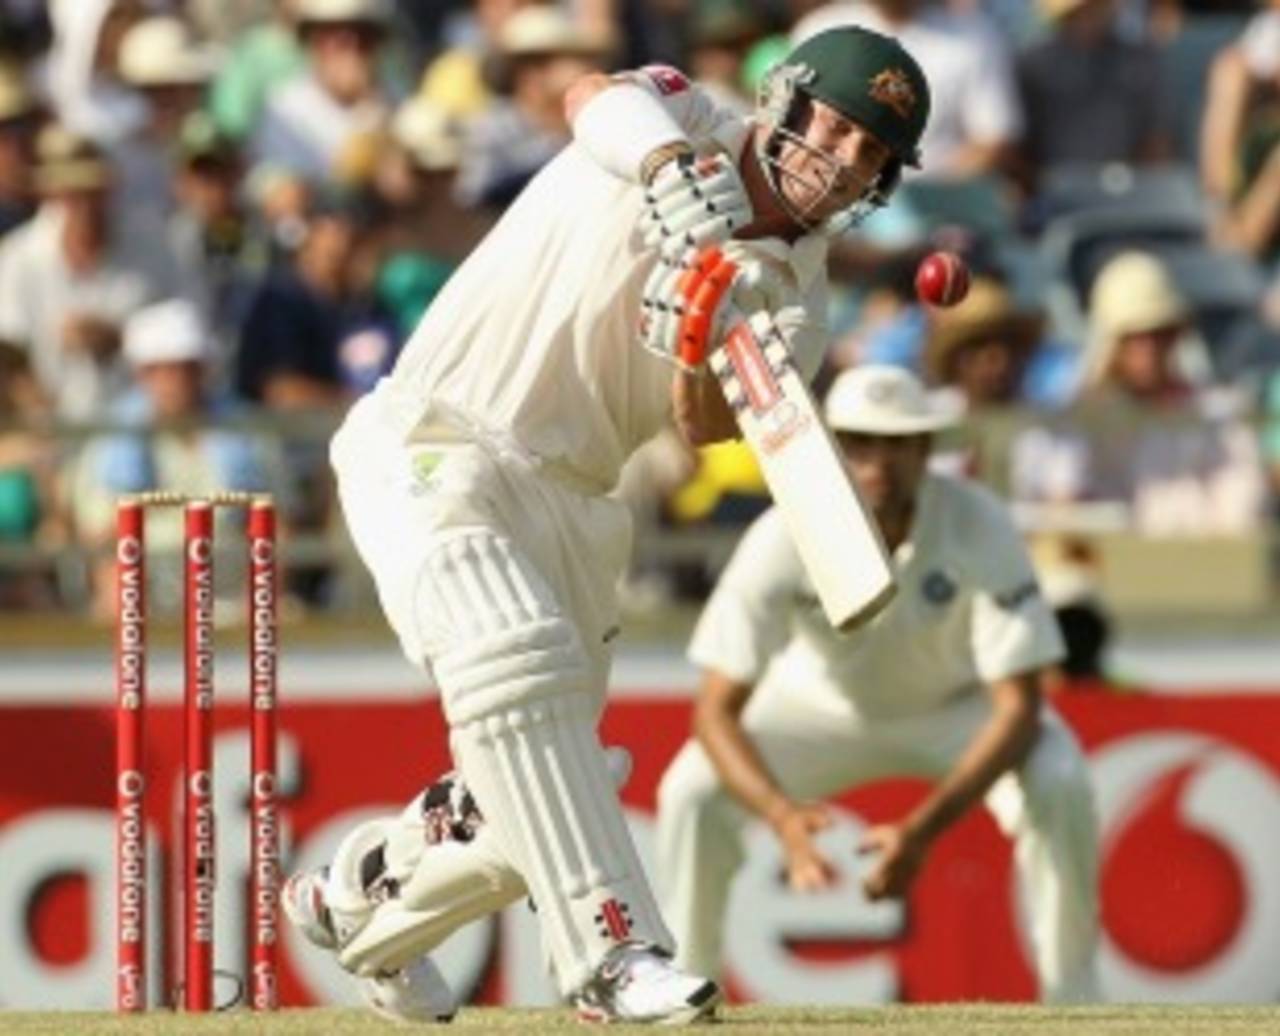 David Warner hits over the top, Australia v India, 3rd Test, Perth, 1st day, January 13, 2012